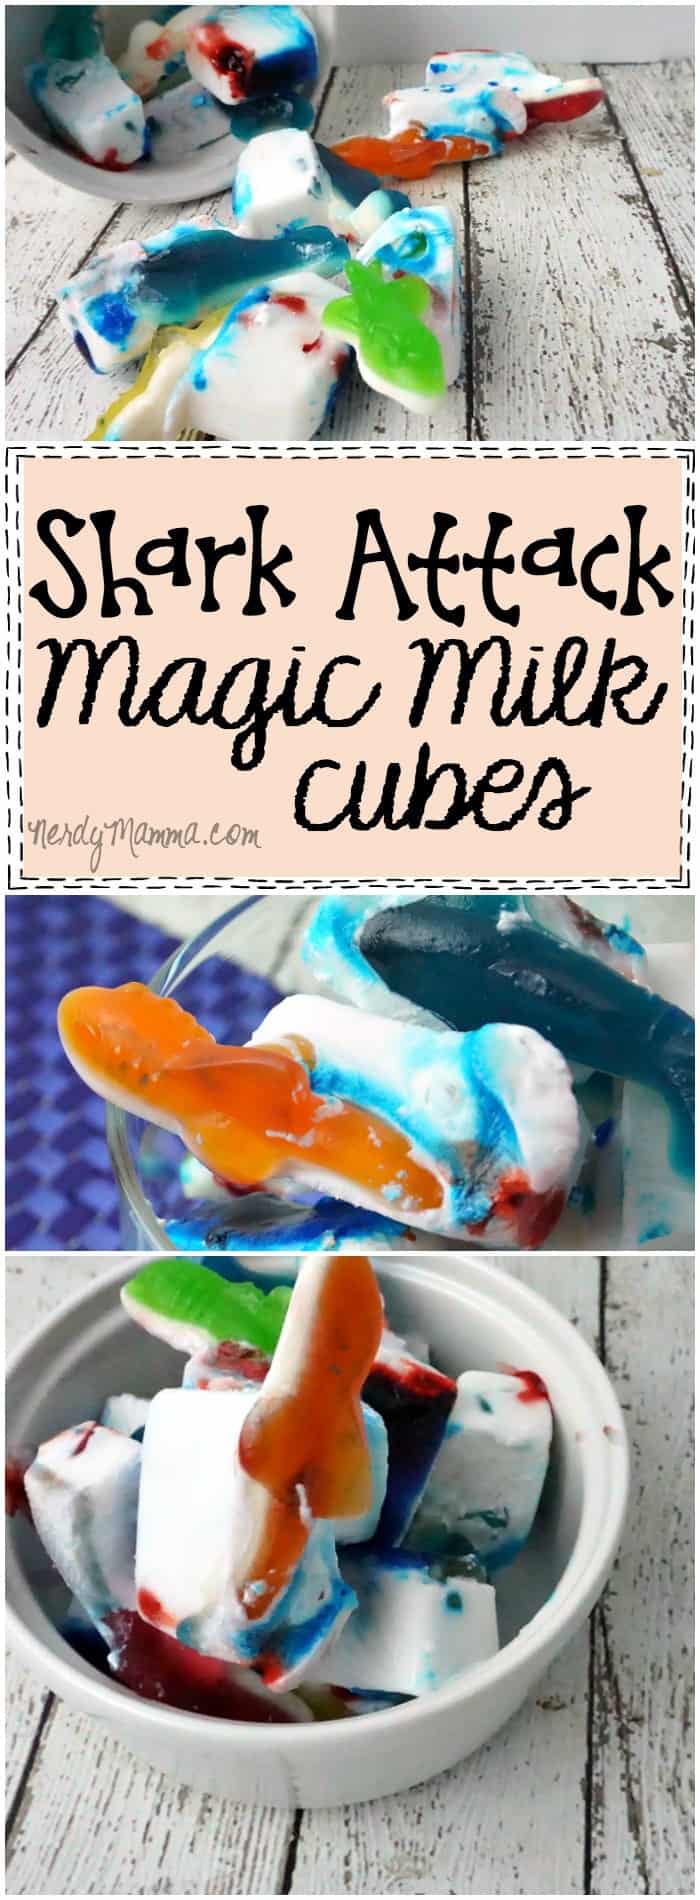 This is such a cute idea! And how easy...I love this recipe for Shark Attack Magic Milk Cubes...and they're really cute...